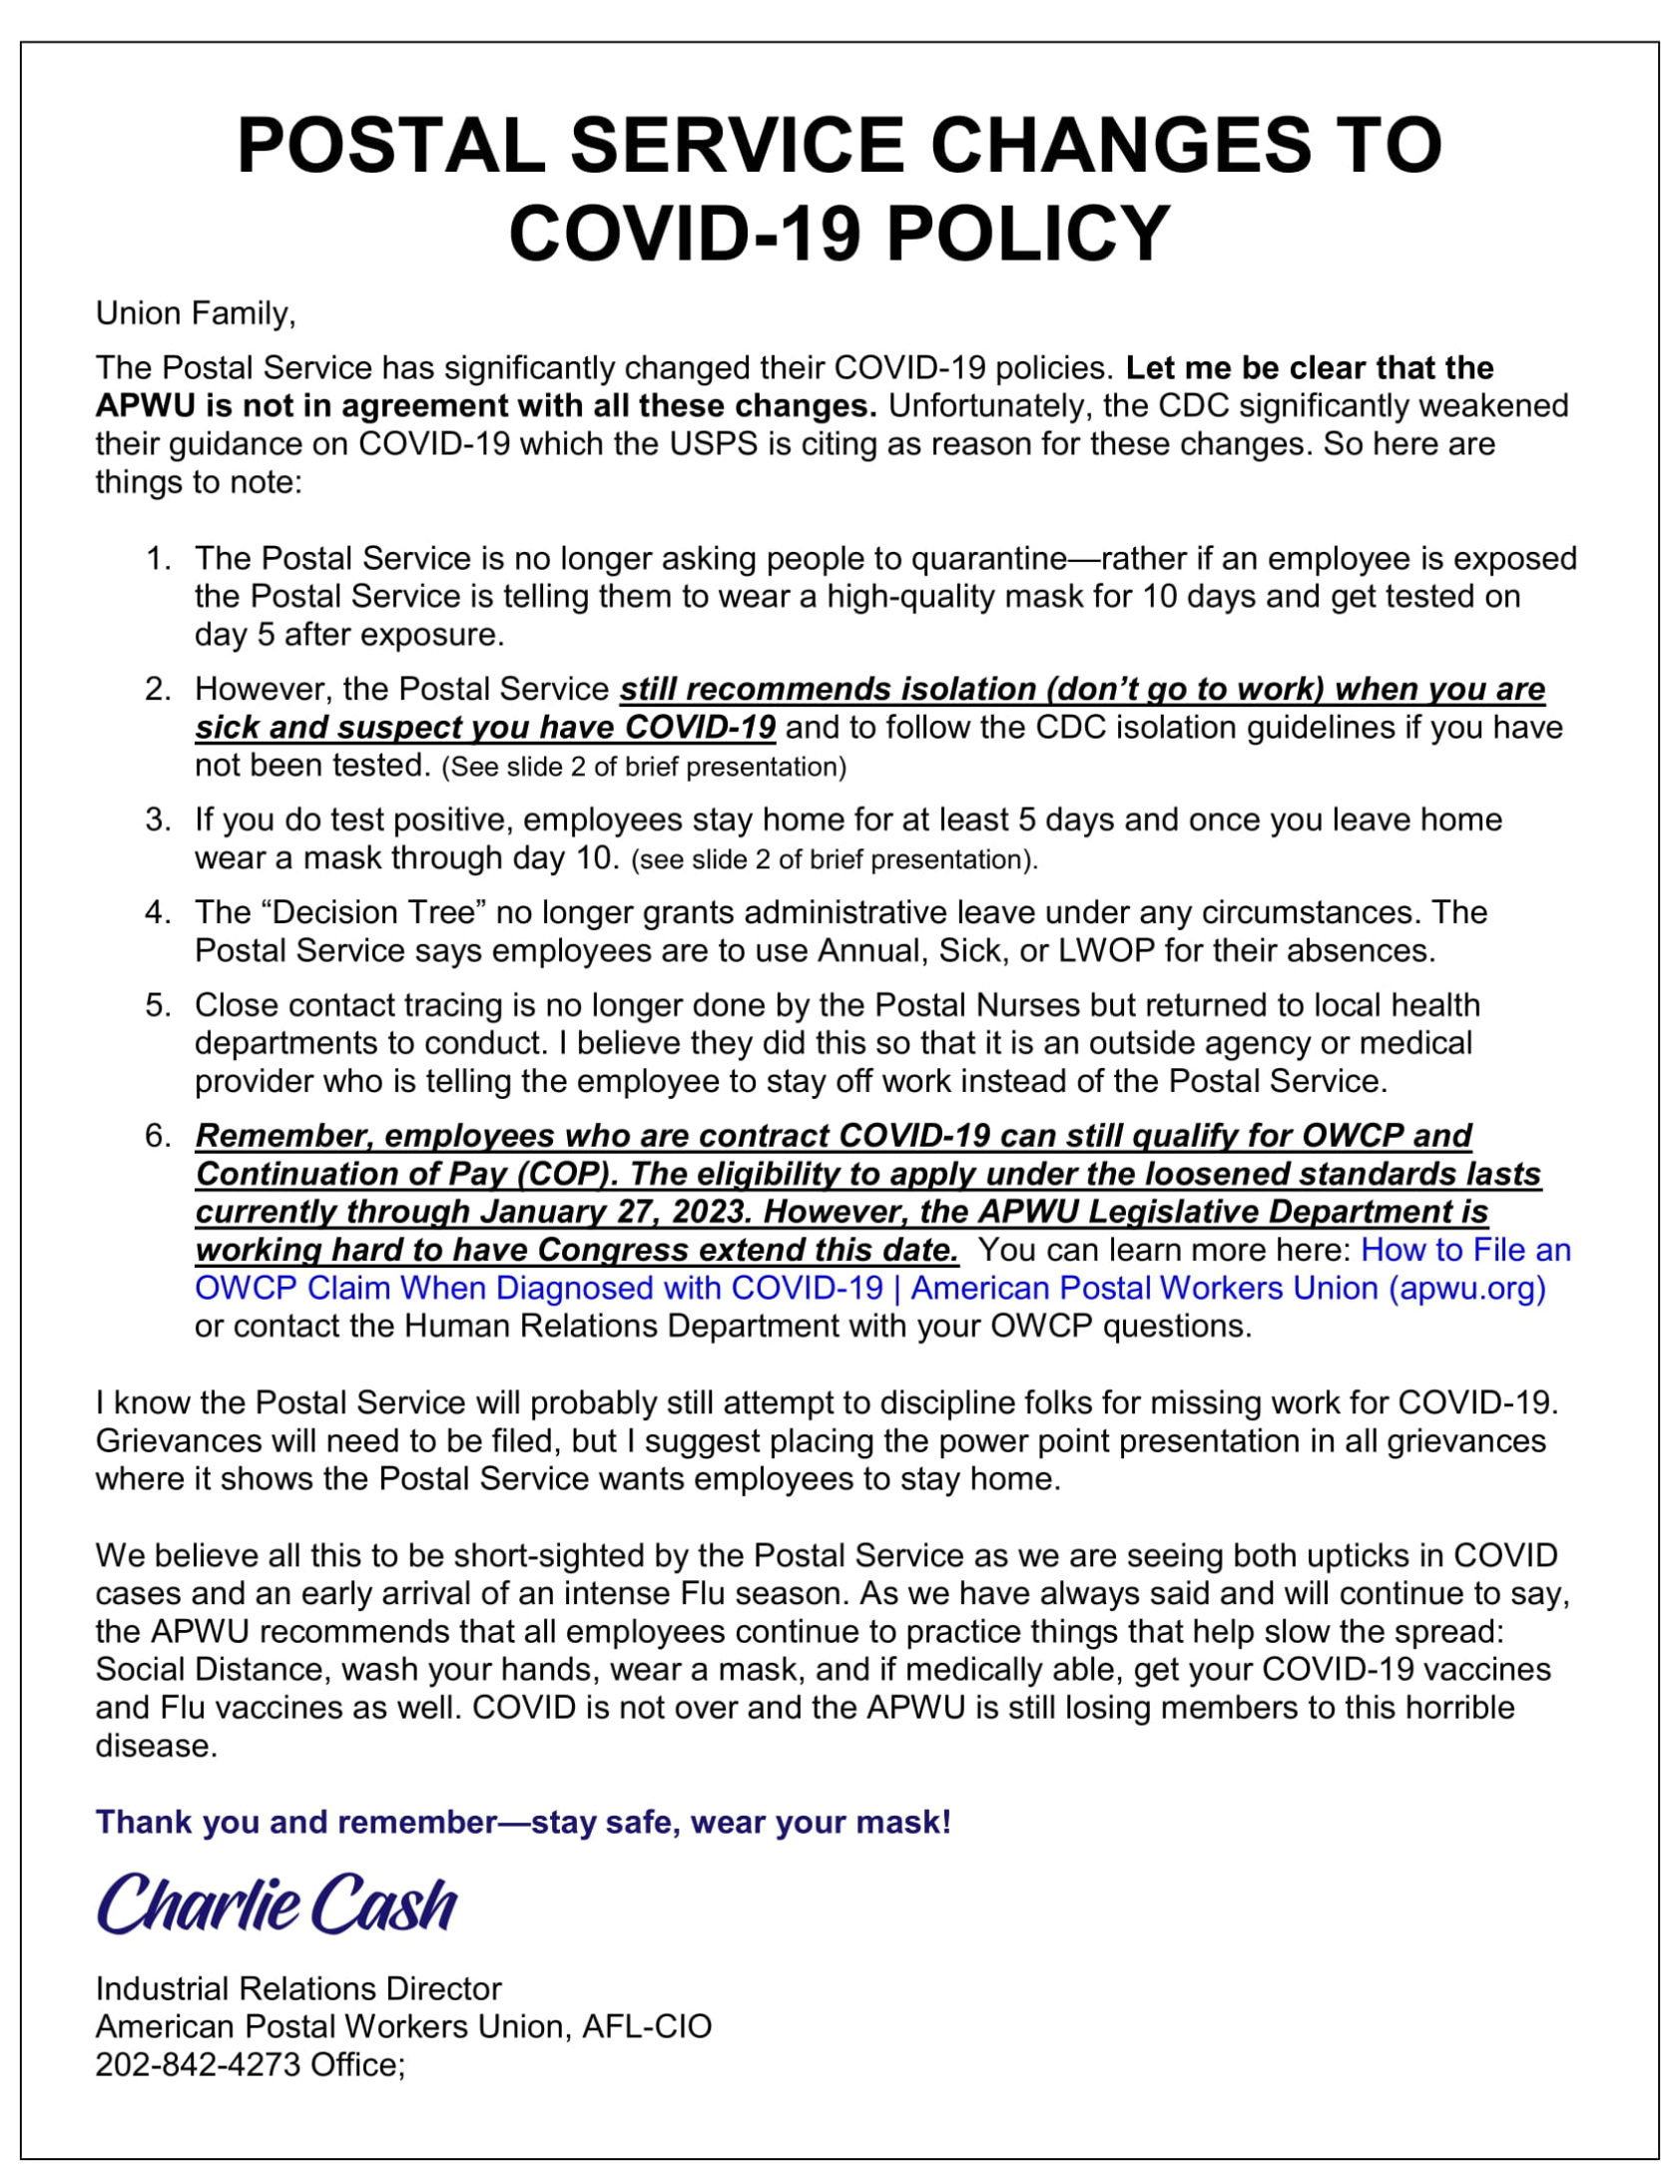 Changes to the USPS Covid-19 Policy - 